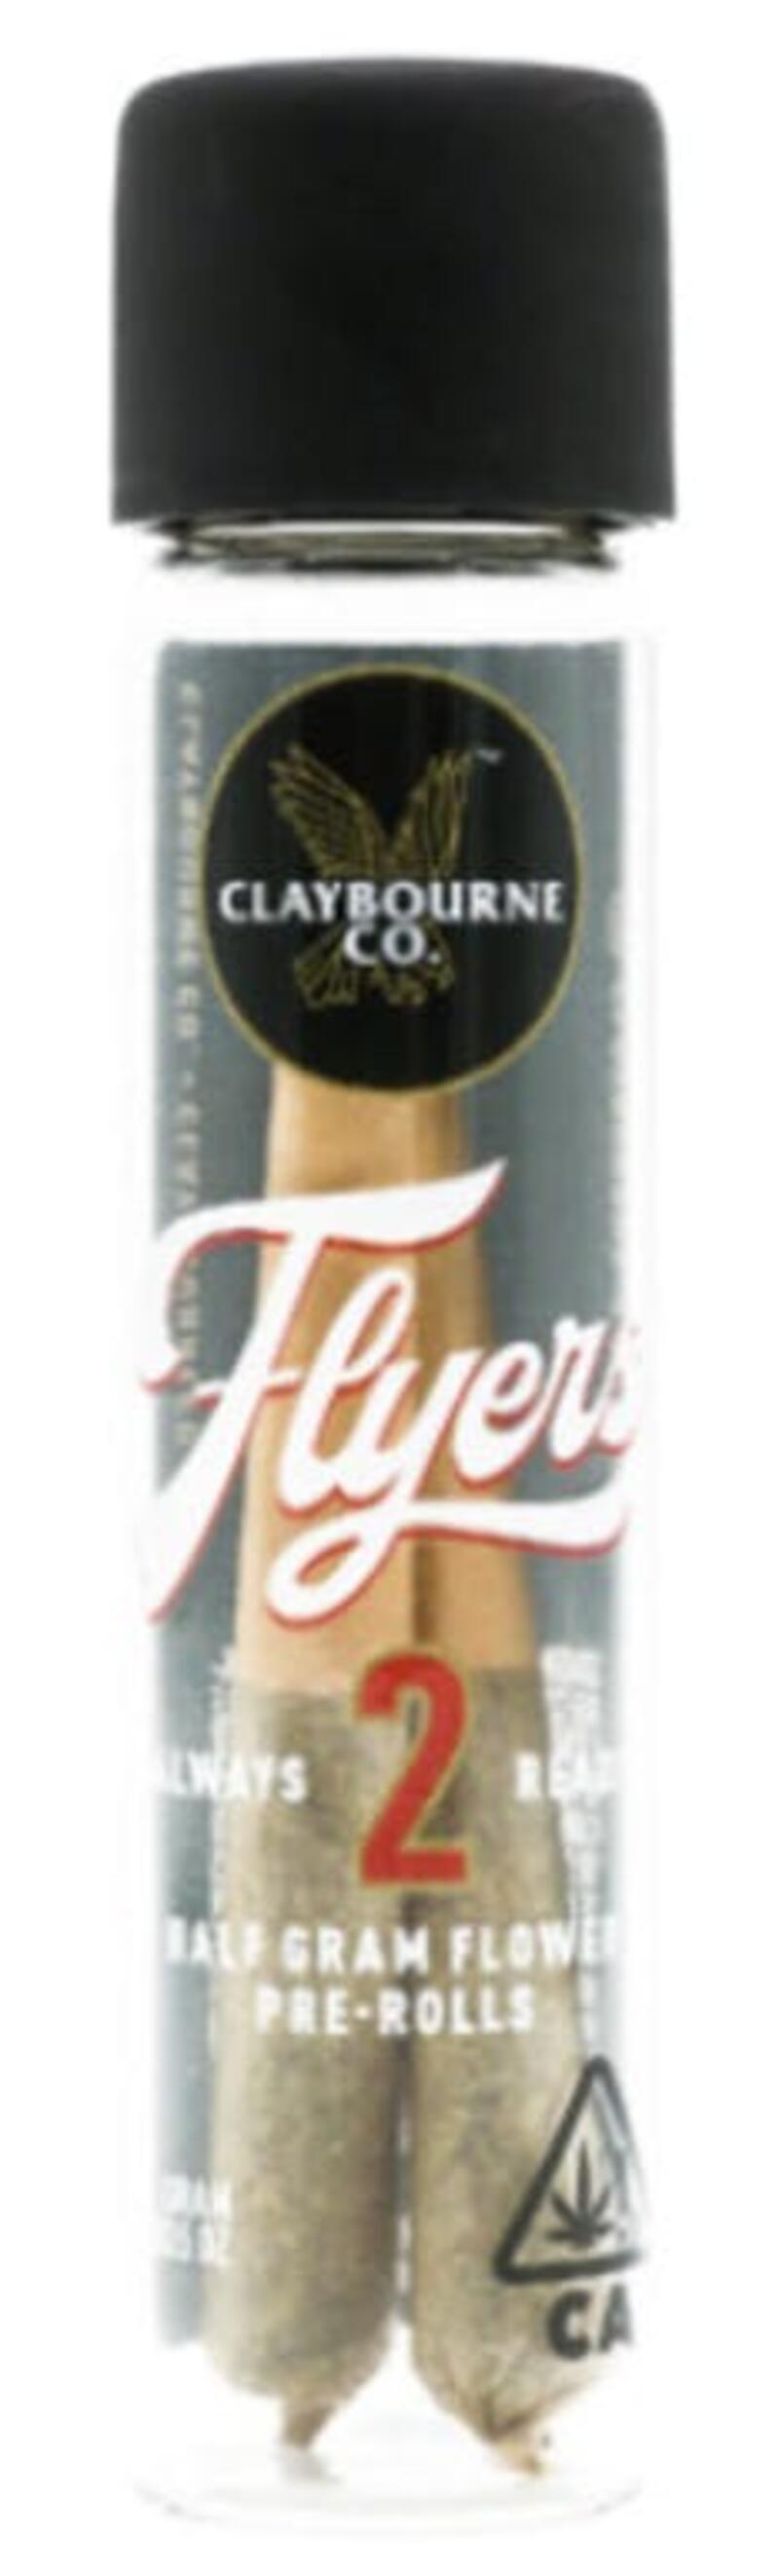 Claybourne - Flyers - Golden Goat - Sativa Infused Pre-Roll 2 Pack